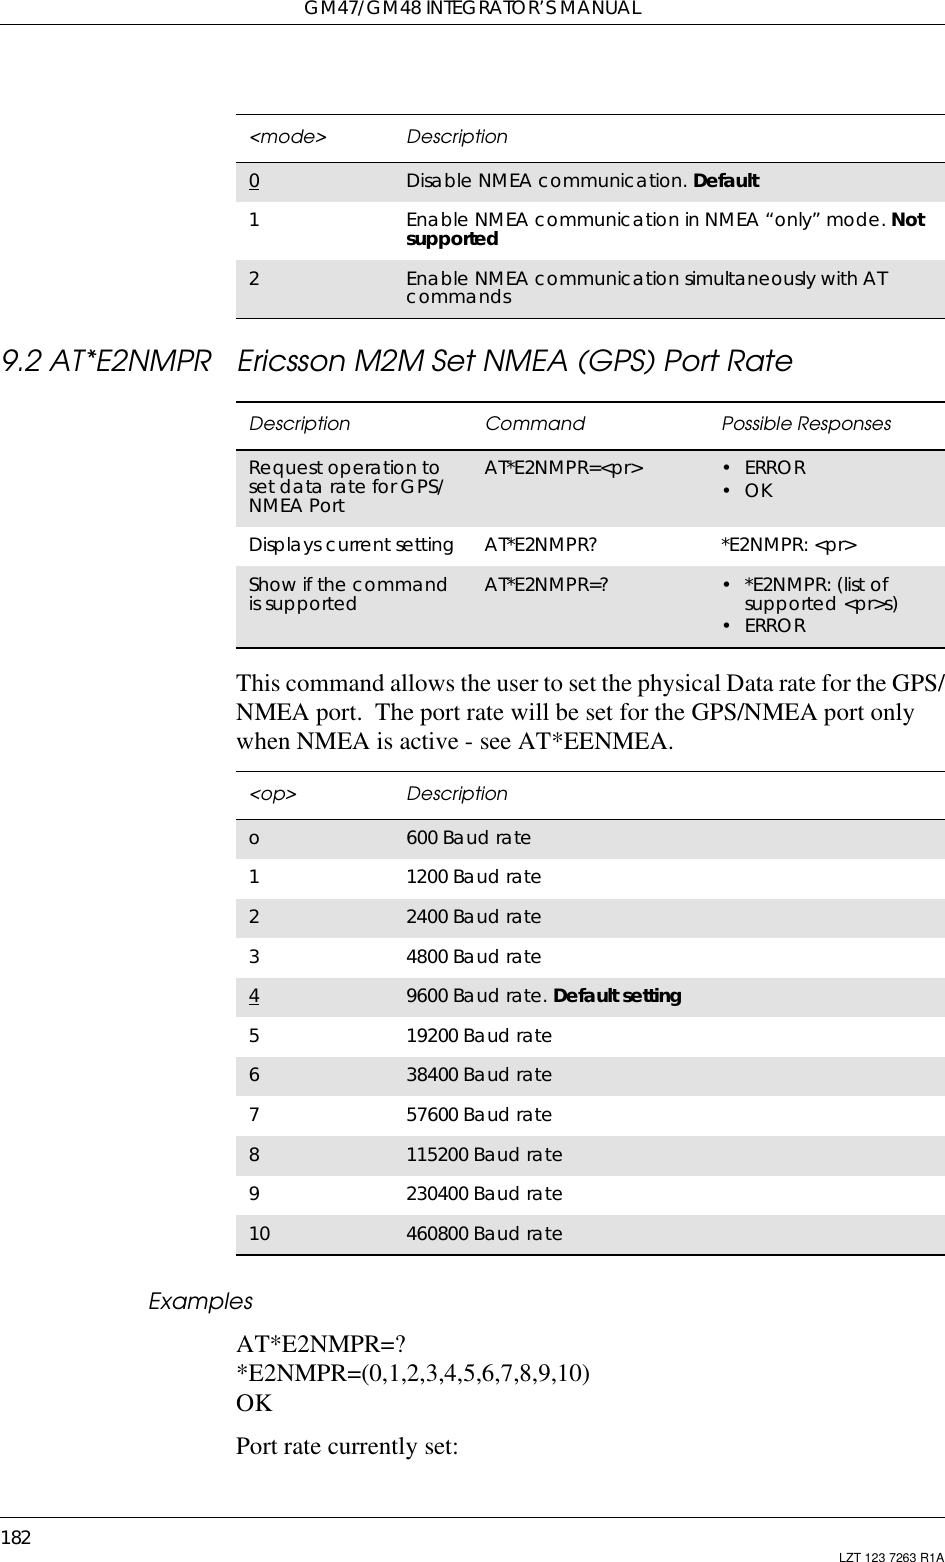 GM47/GM48 INTEGRATOR’S MANUAL182 LZT 123 7263 R1A9.2 AT*E2NMPR Ericsson M2M Set NMEA (GPS) Port RateThis command allows the user to set the physical Data rate for the GPS/NMEA port. The port rate will be set for the GPS/NMEA port onlywhen NMEA is active - see AT*EENMEA.ExamplesAT*E2NMPR=?*E2NMPR=(0,1,2,3,4,5,6,7,8,9,10)OKPort rate currently set:&lt;mode&gt; Description0Disable NMEA communication. Default1Enable NMEA communication in NMEA “only” mode. Notsupported2Enable NMEA communication simultaneously with ATcommandsDescription Command Possible ResponsesRequest operation toset data rate for GPS/NMEA PortAT*E2NMPR=&lt;pr&gt; •ERROR•OKDisplays current setting AT*E2NMPR? *E2NMPR: &lt;pr&gt;Show if the commandis supported AT*E2NMPR=? •*E2NMPR:(listofsupported &lt;pr&gt;s)•ERROR&lt;op&gt; Descriptiono600 Baud rate11200 Baud rate22400 Baud rate34800 Baud rate49600 Baud rate. Default setting519200 Baud rate638400 Baud rate757600 Baud rate8115200 Baud rate9230400 Baud rate10 460800 Baud rate